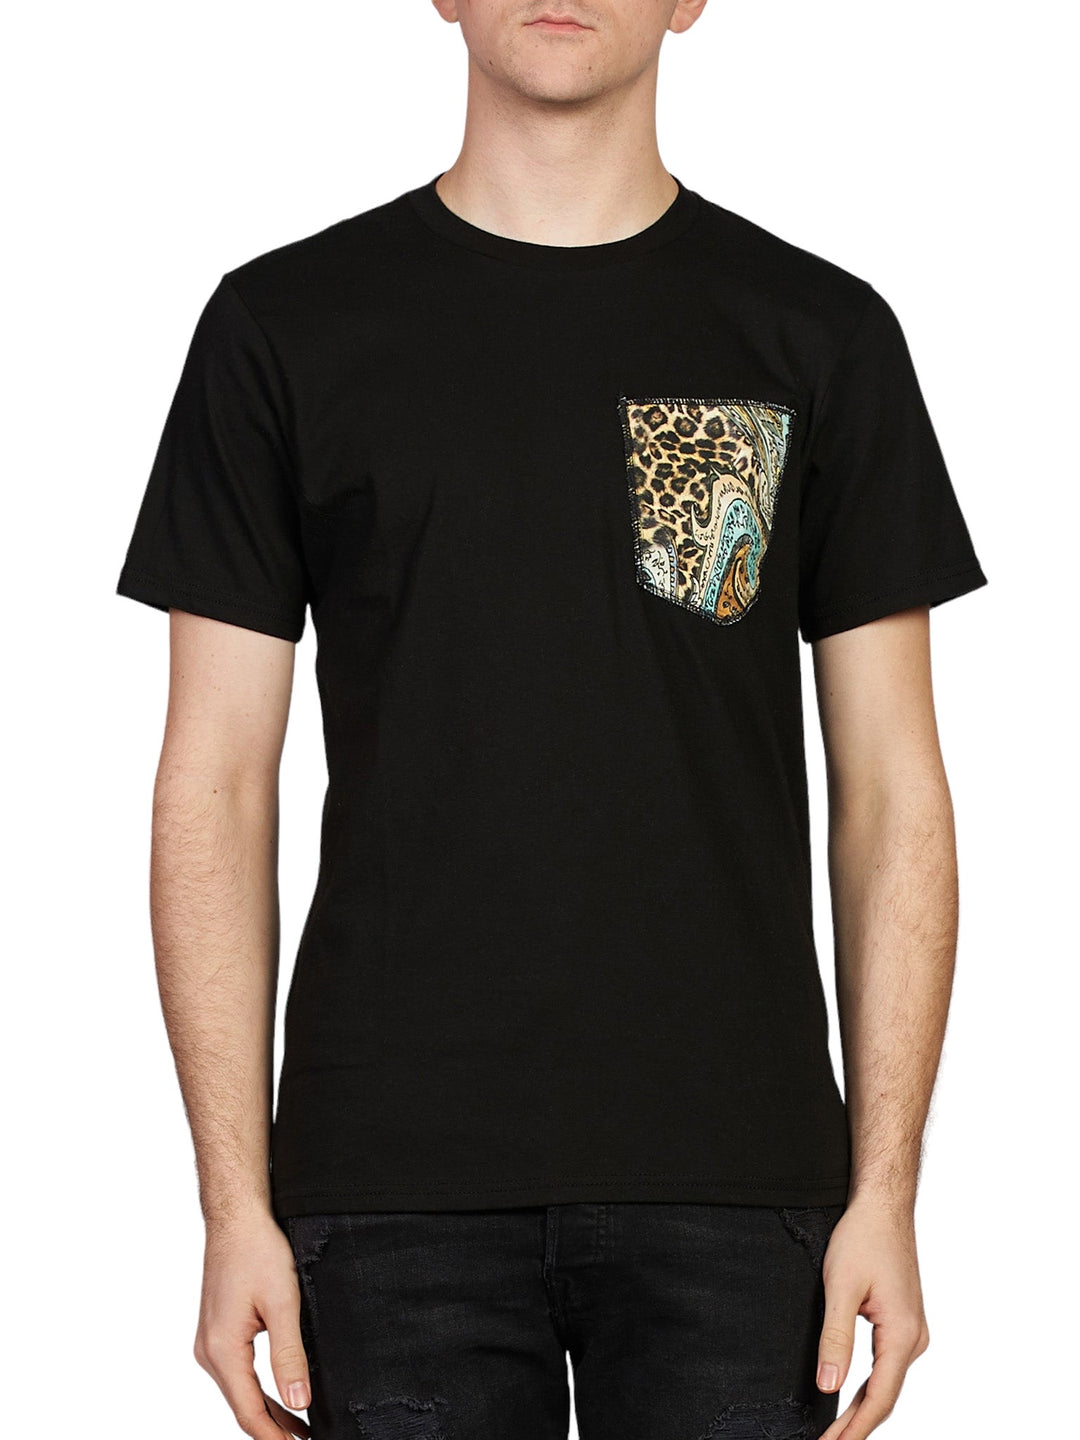 Black Tee with Leopard/Paisley Pocket (25% OFF)